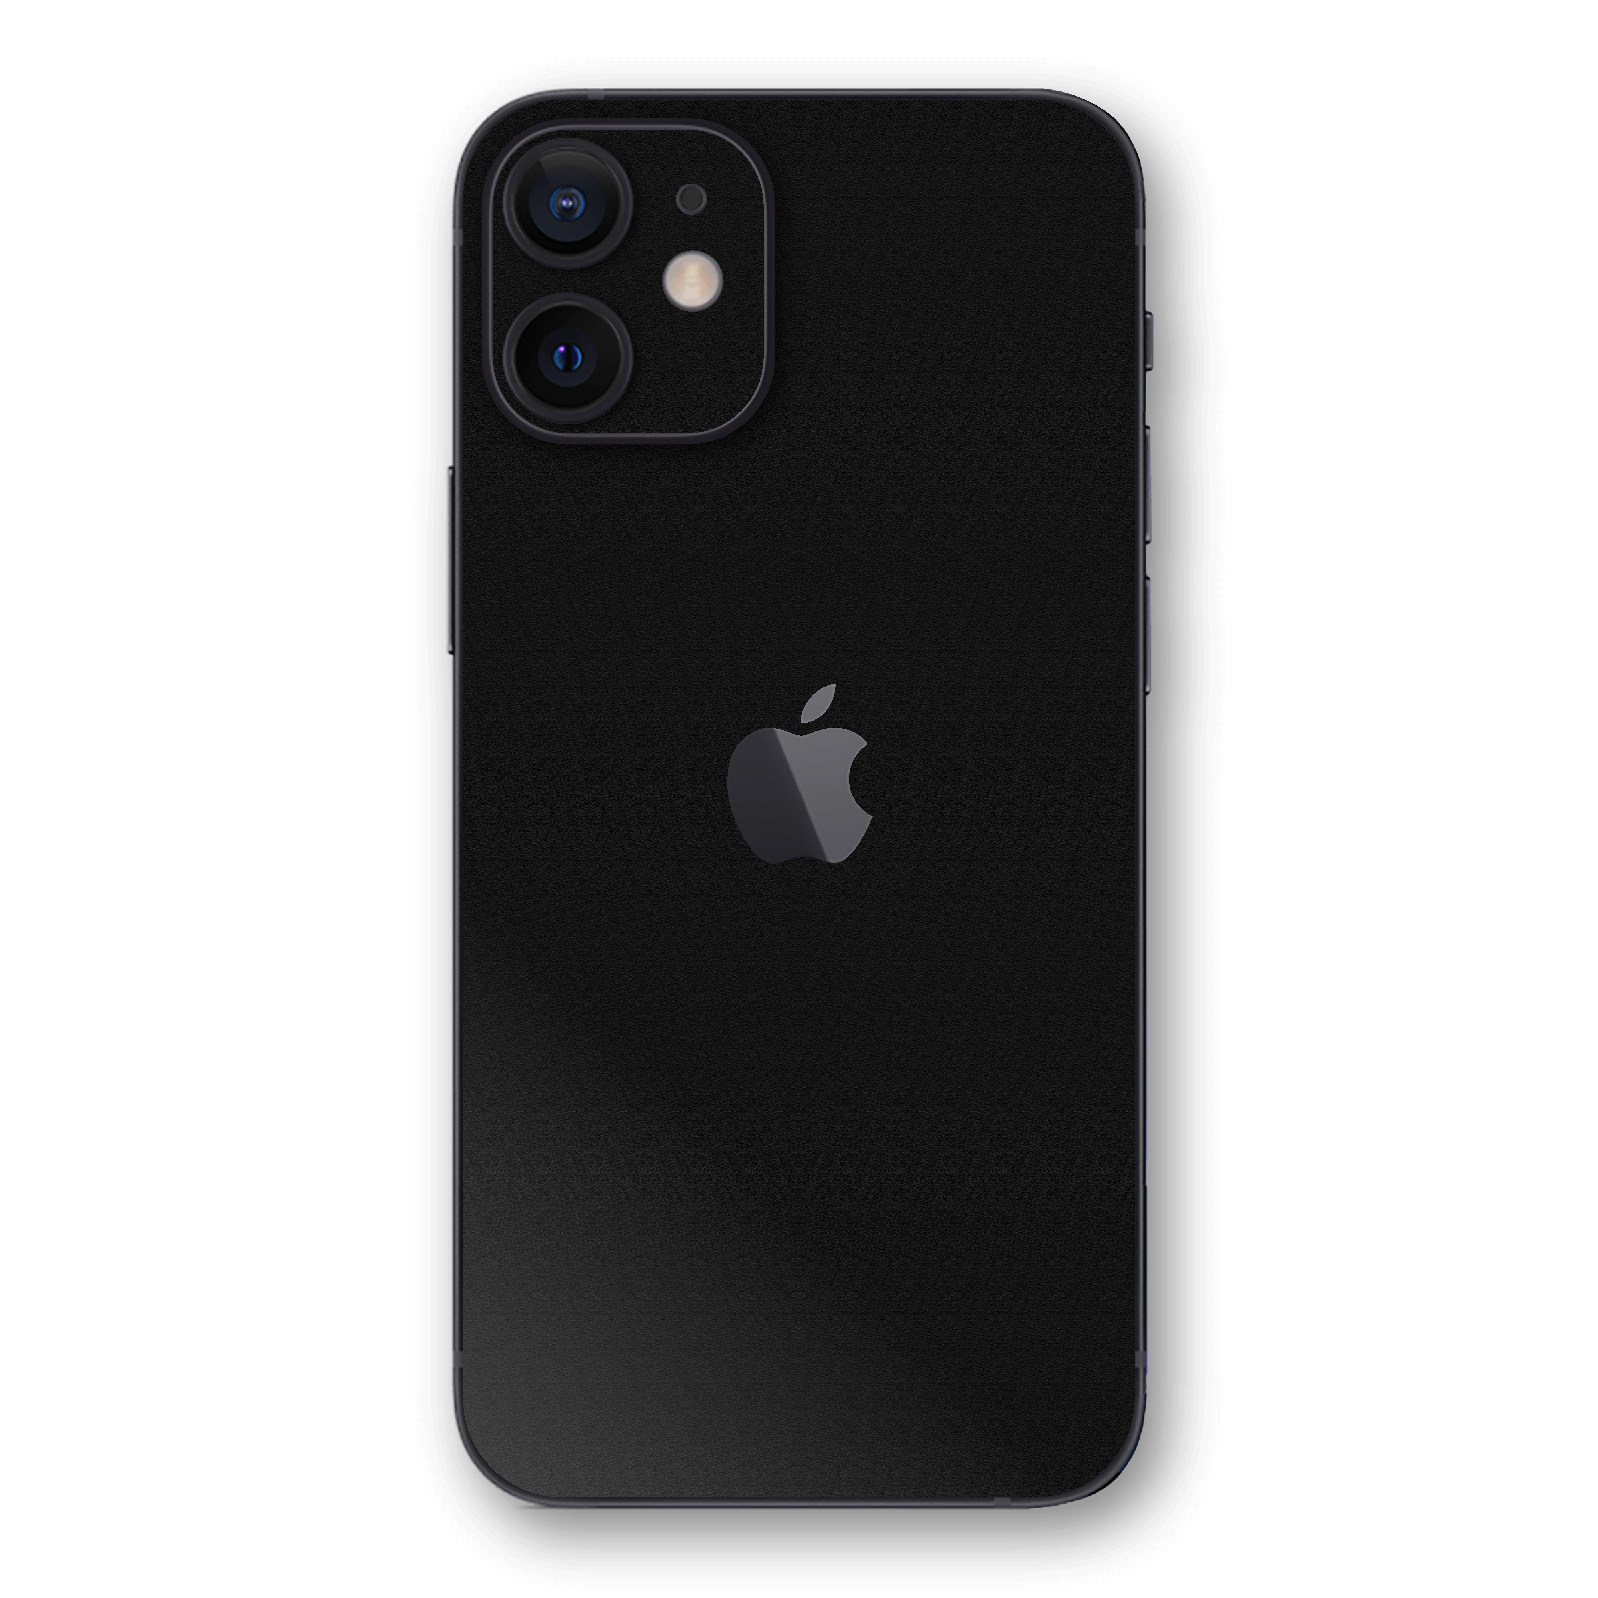 iPhone 12 LUXURIA Raven Black Textured Skin - Premium Protective Skin Wrap Sticker Decal Cover by QSKINZ | Qskinz.com